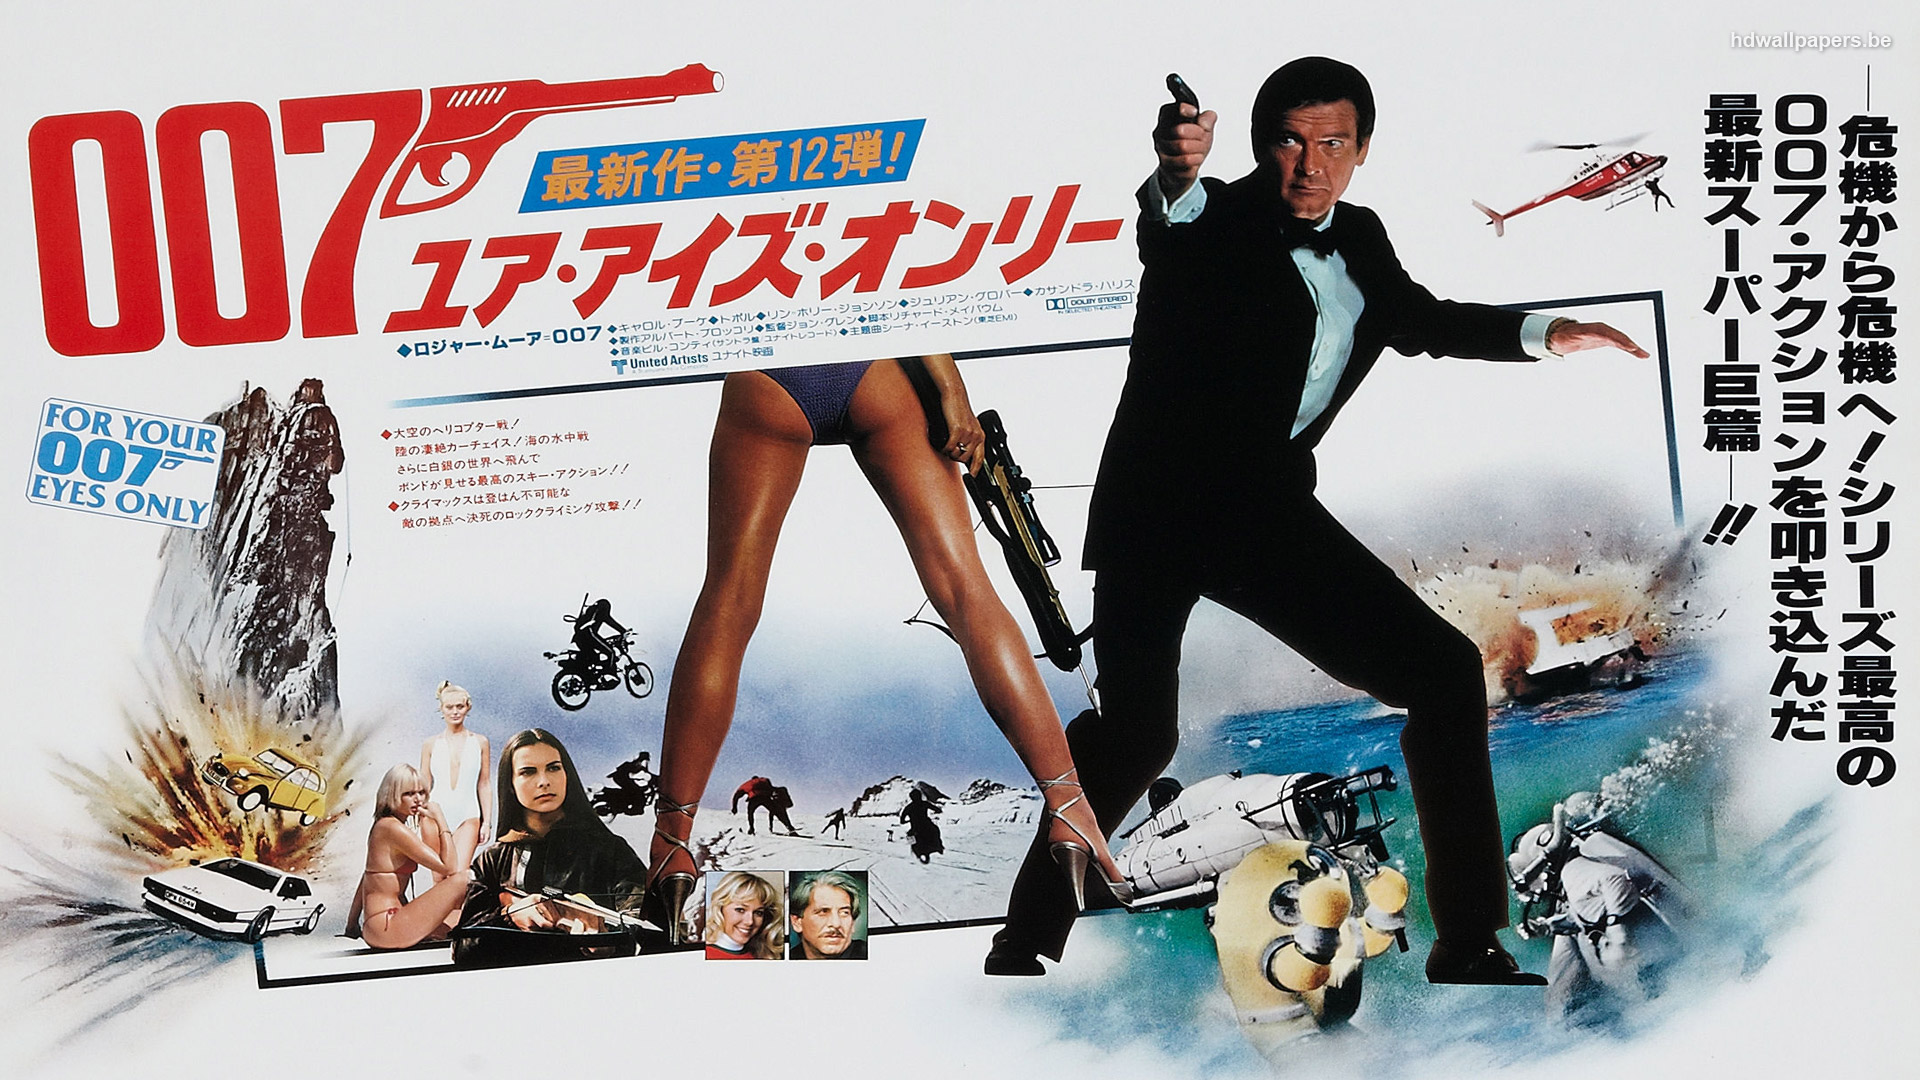 Movie Posters Are Also Available For The Other James Bond Films